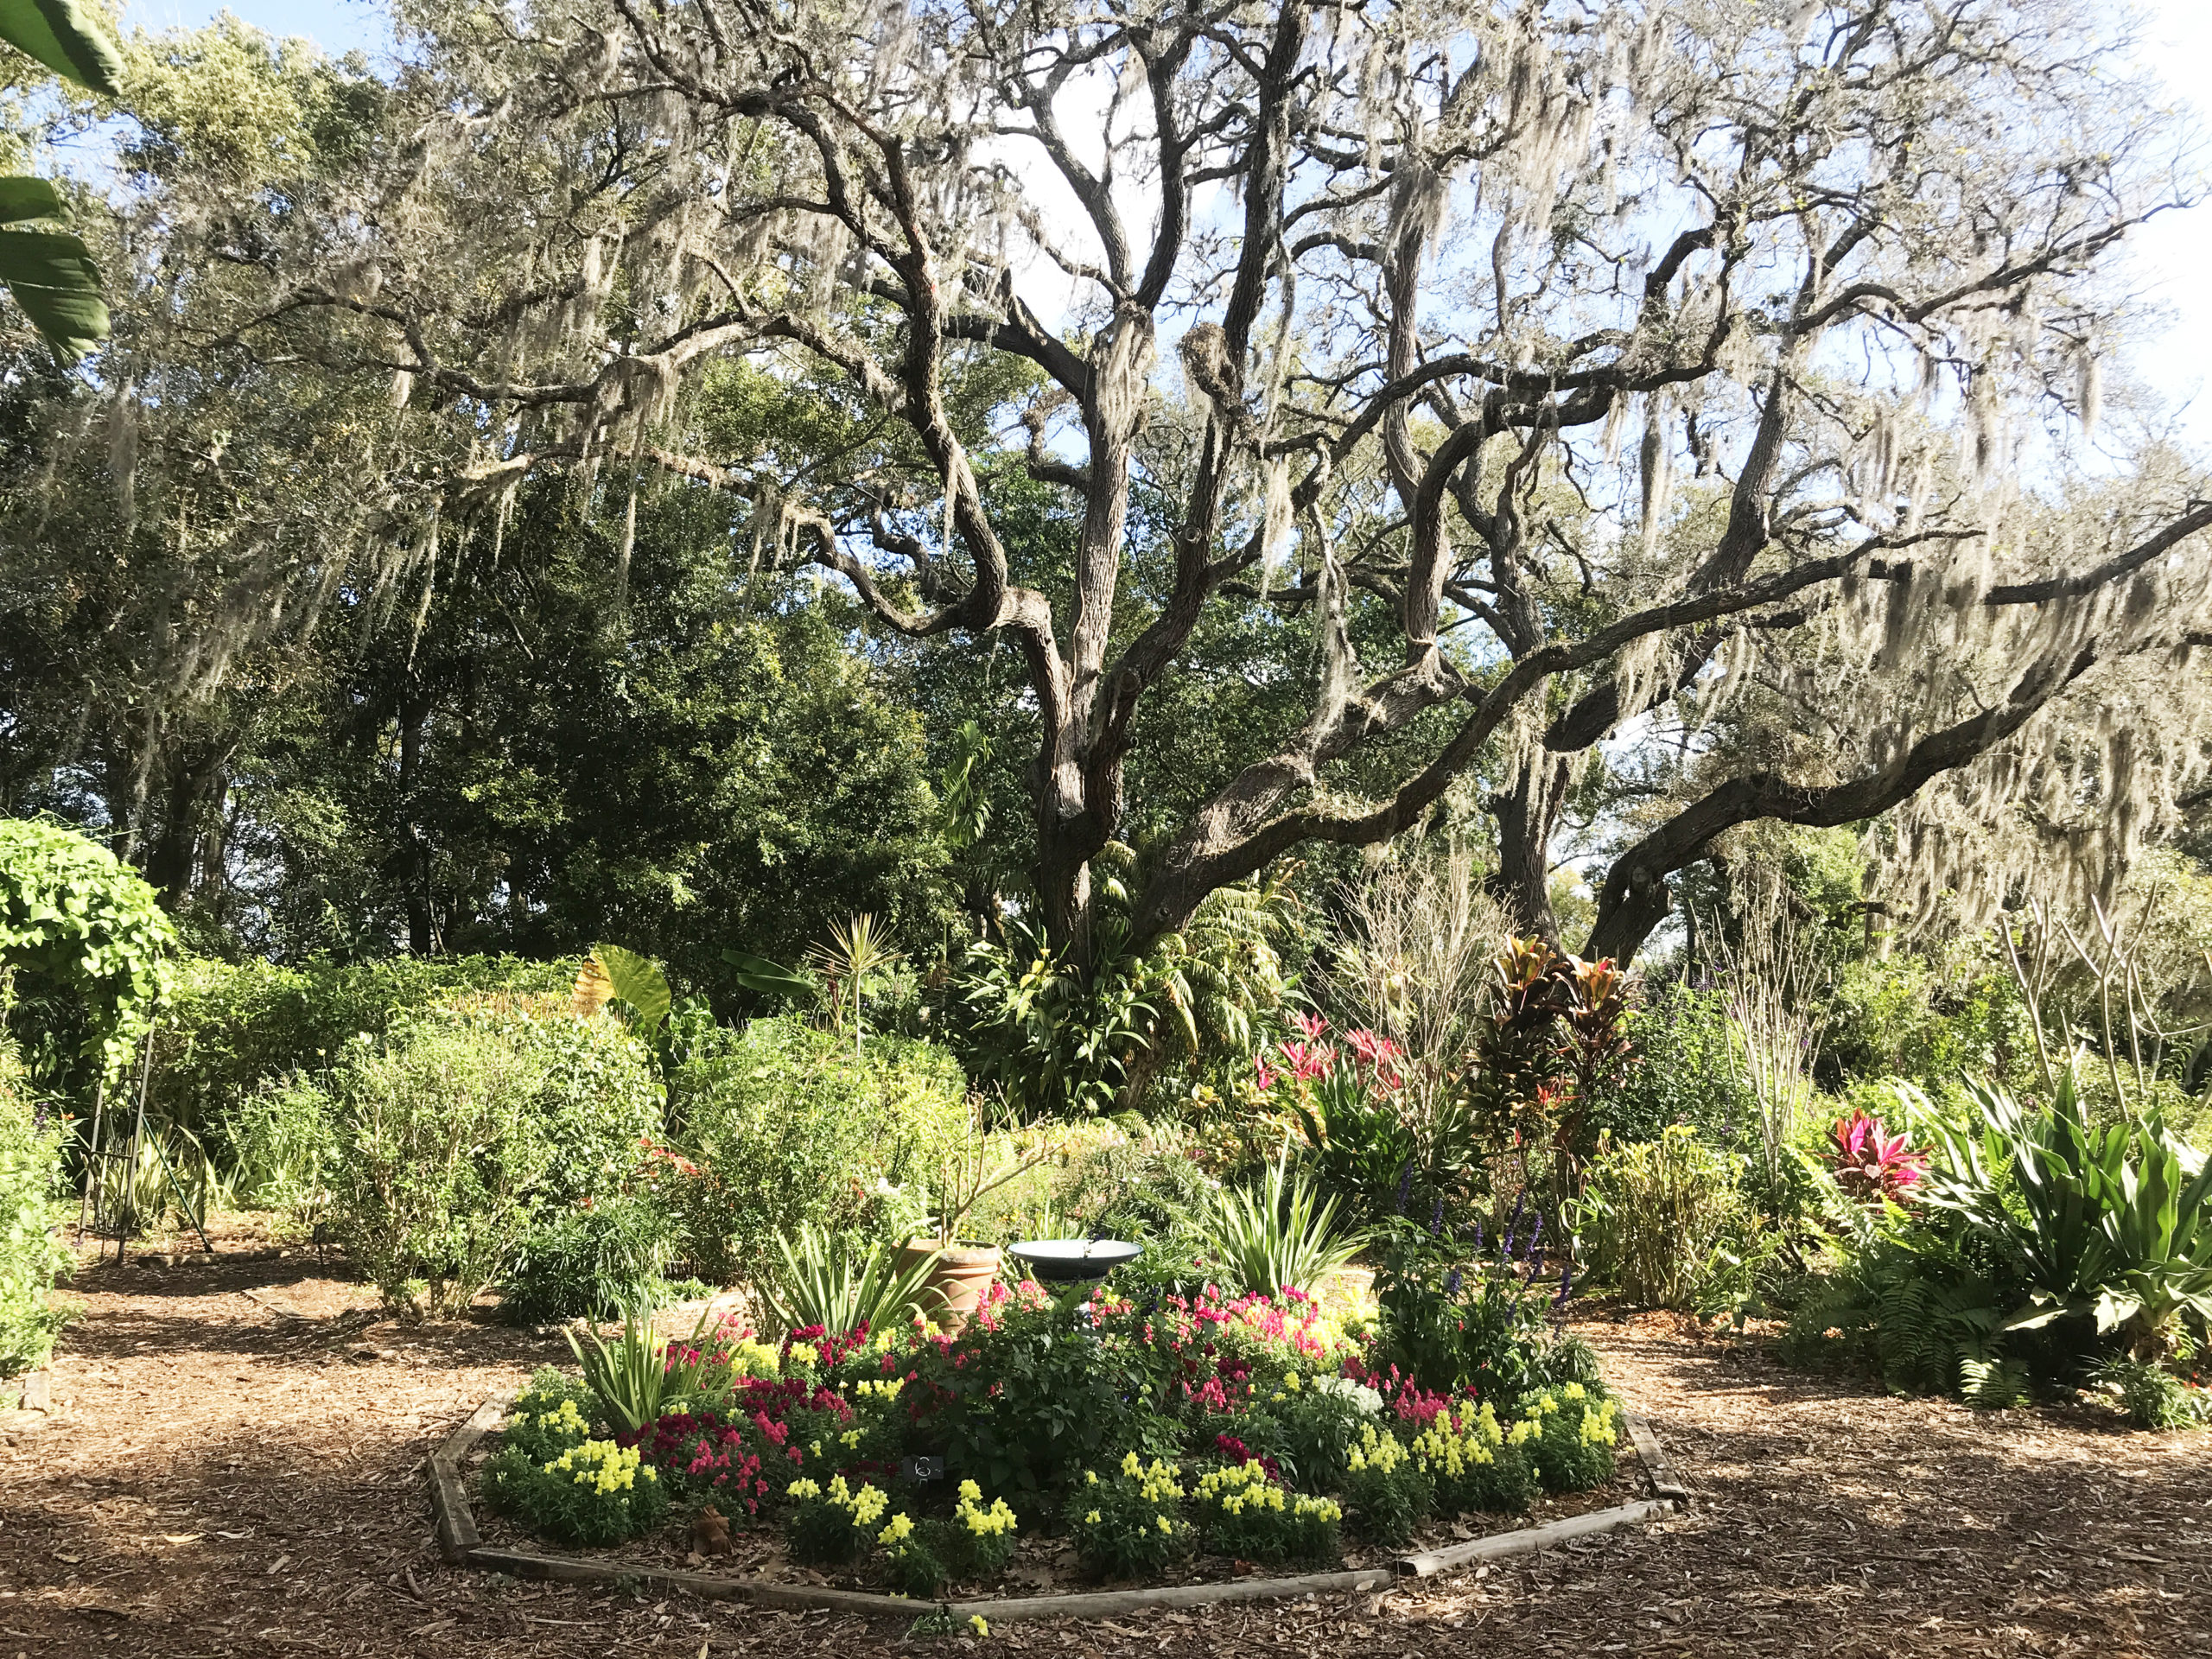 Things to do in Winter Park: A beauty spot at Mead Botanical Garden. (Photo: Bonnie Gross)